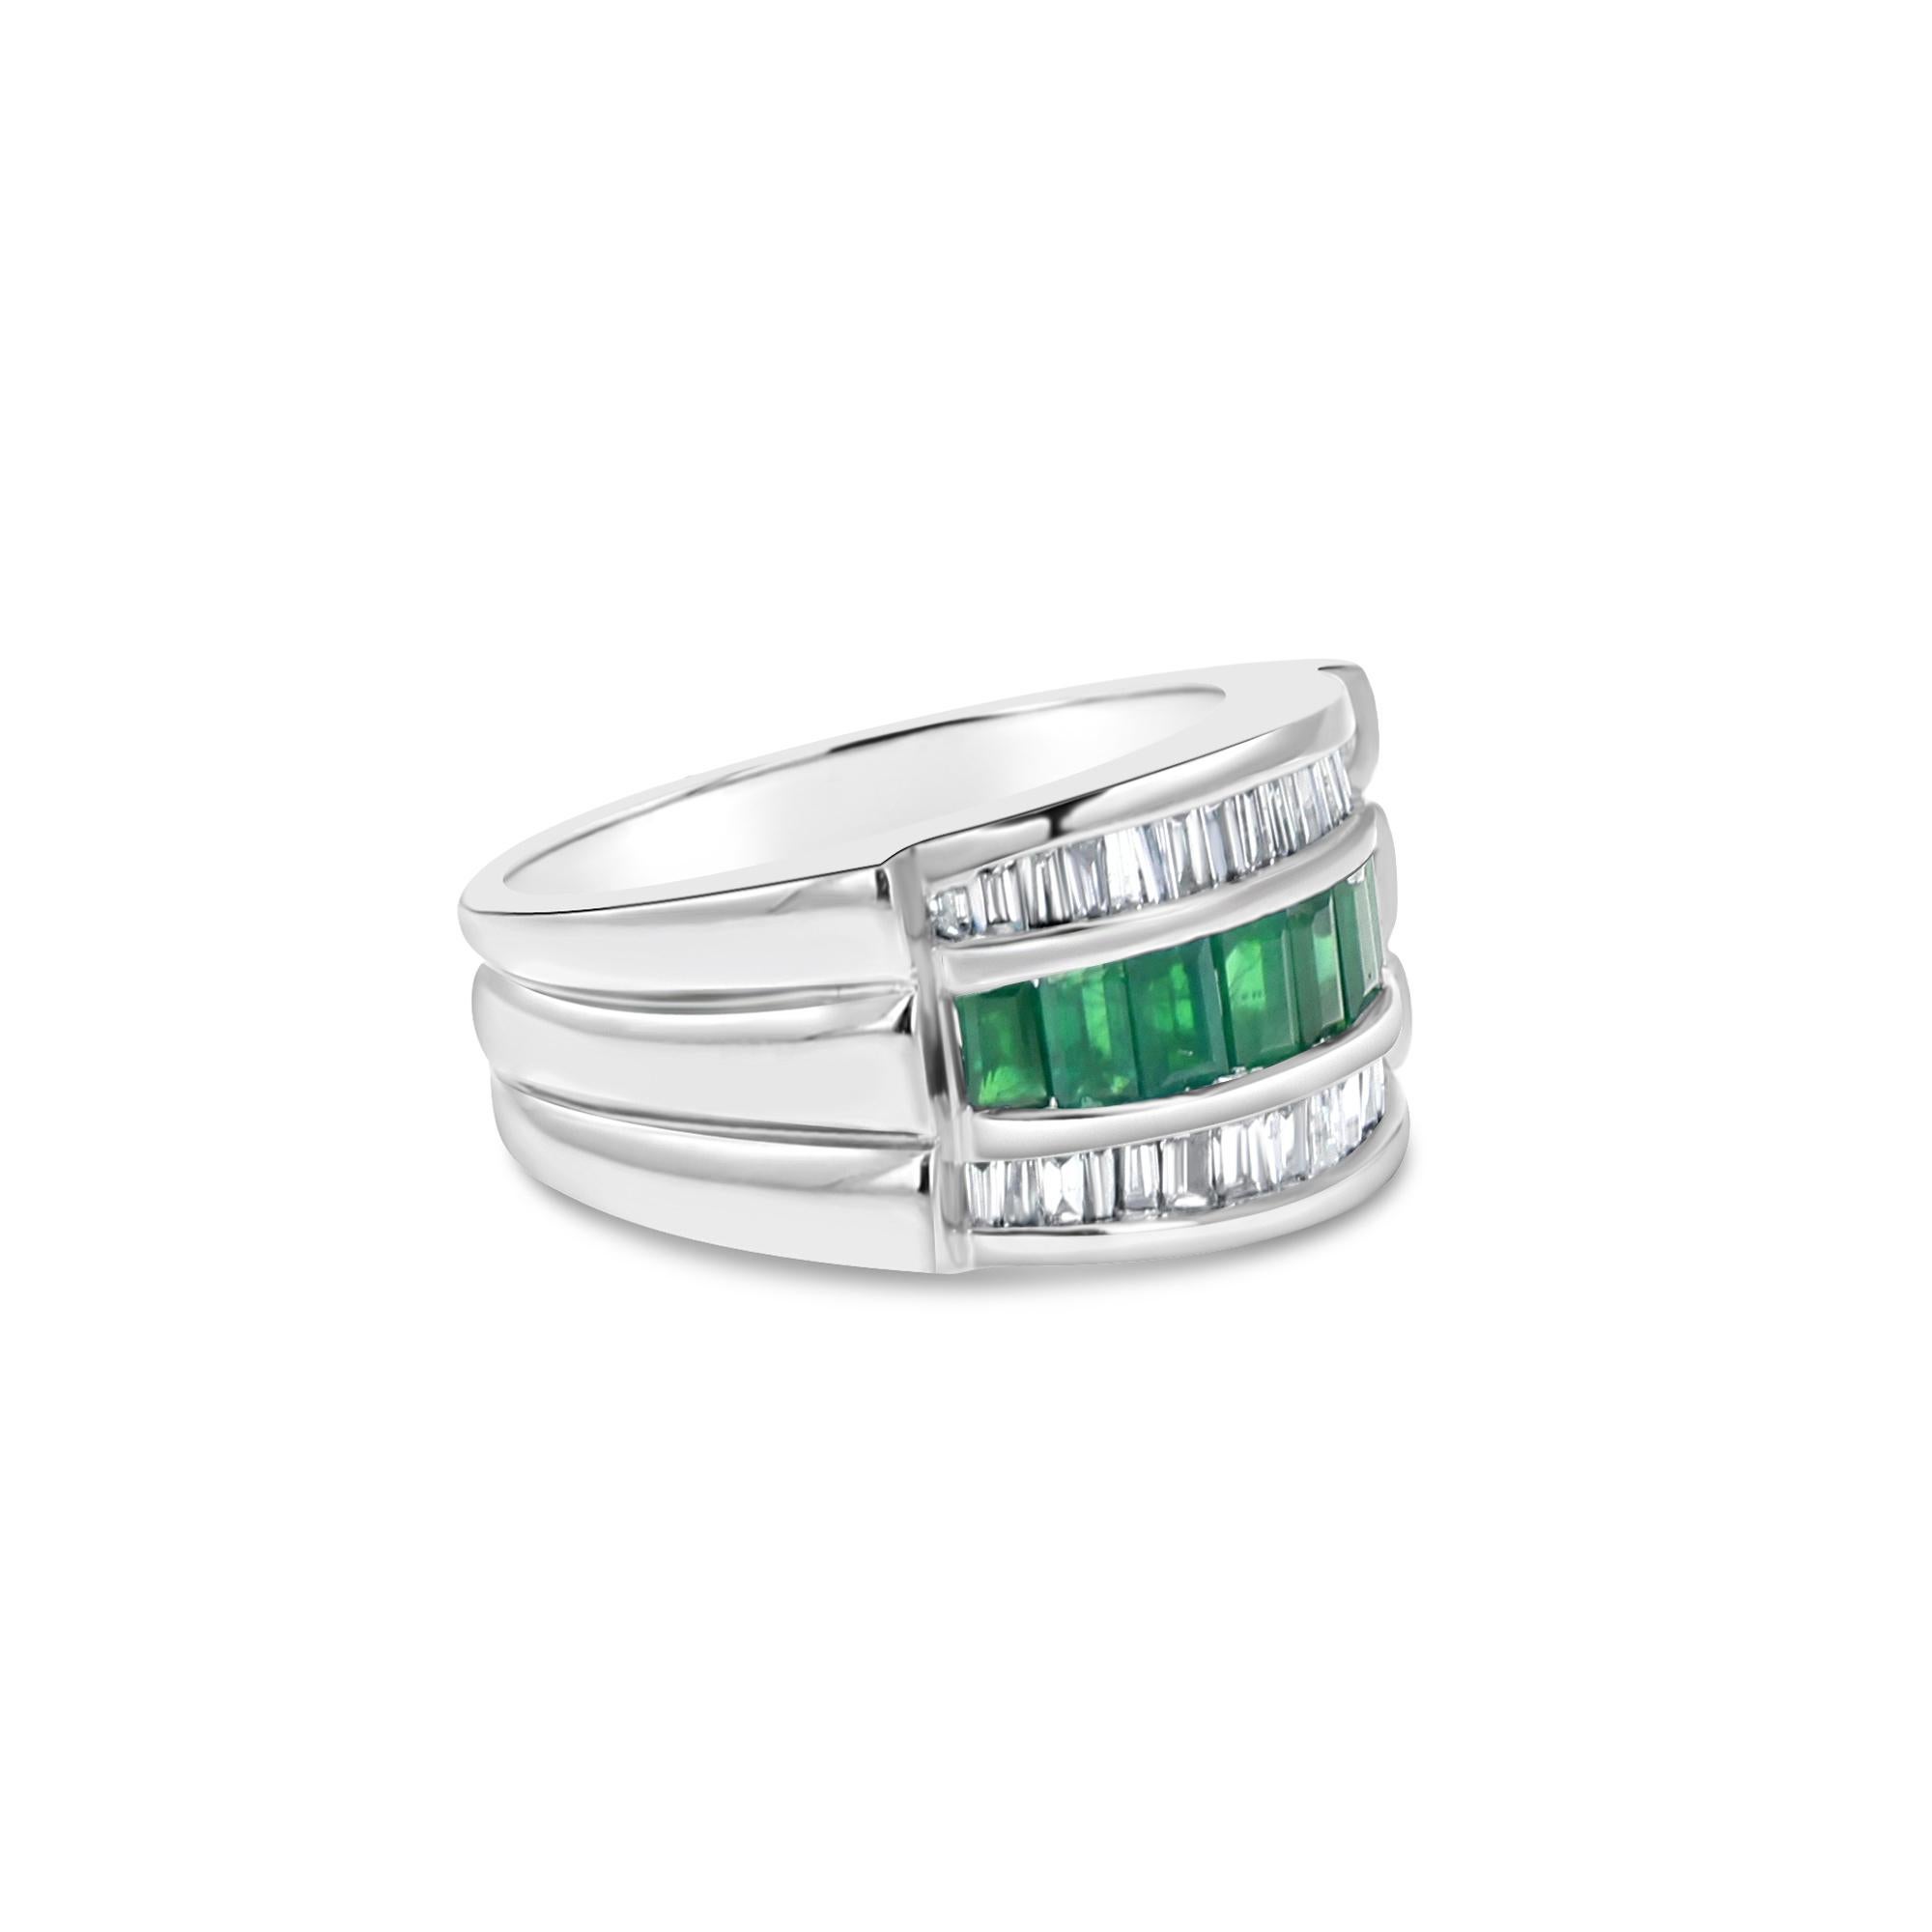 ♥ Product Summary ♥

Main Stone: Diamond & Emerald 
Approx. Total Carat Weight: 2.00cttw
Diamond Color: G/H
Diamond Clarity: VS2/SI1
Diamond Cut: Baguette
Band Material: 14k White Gold